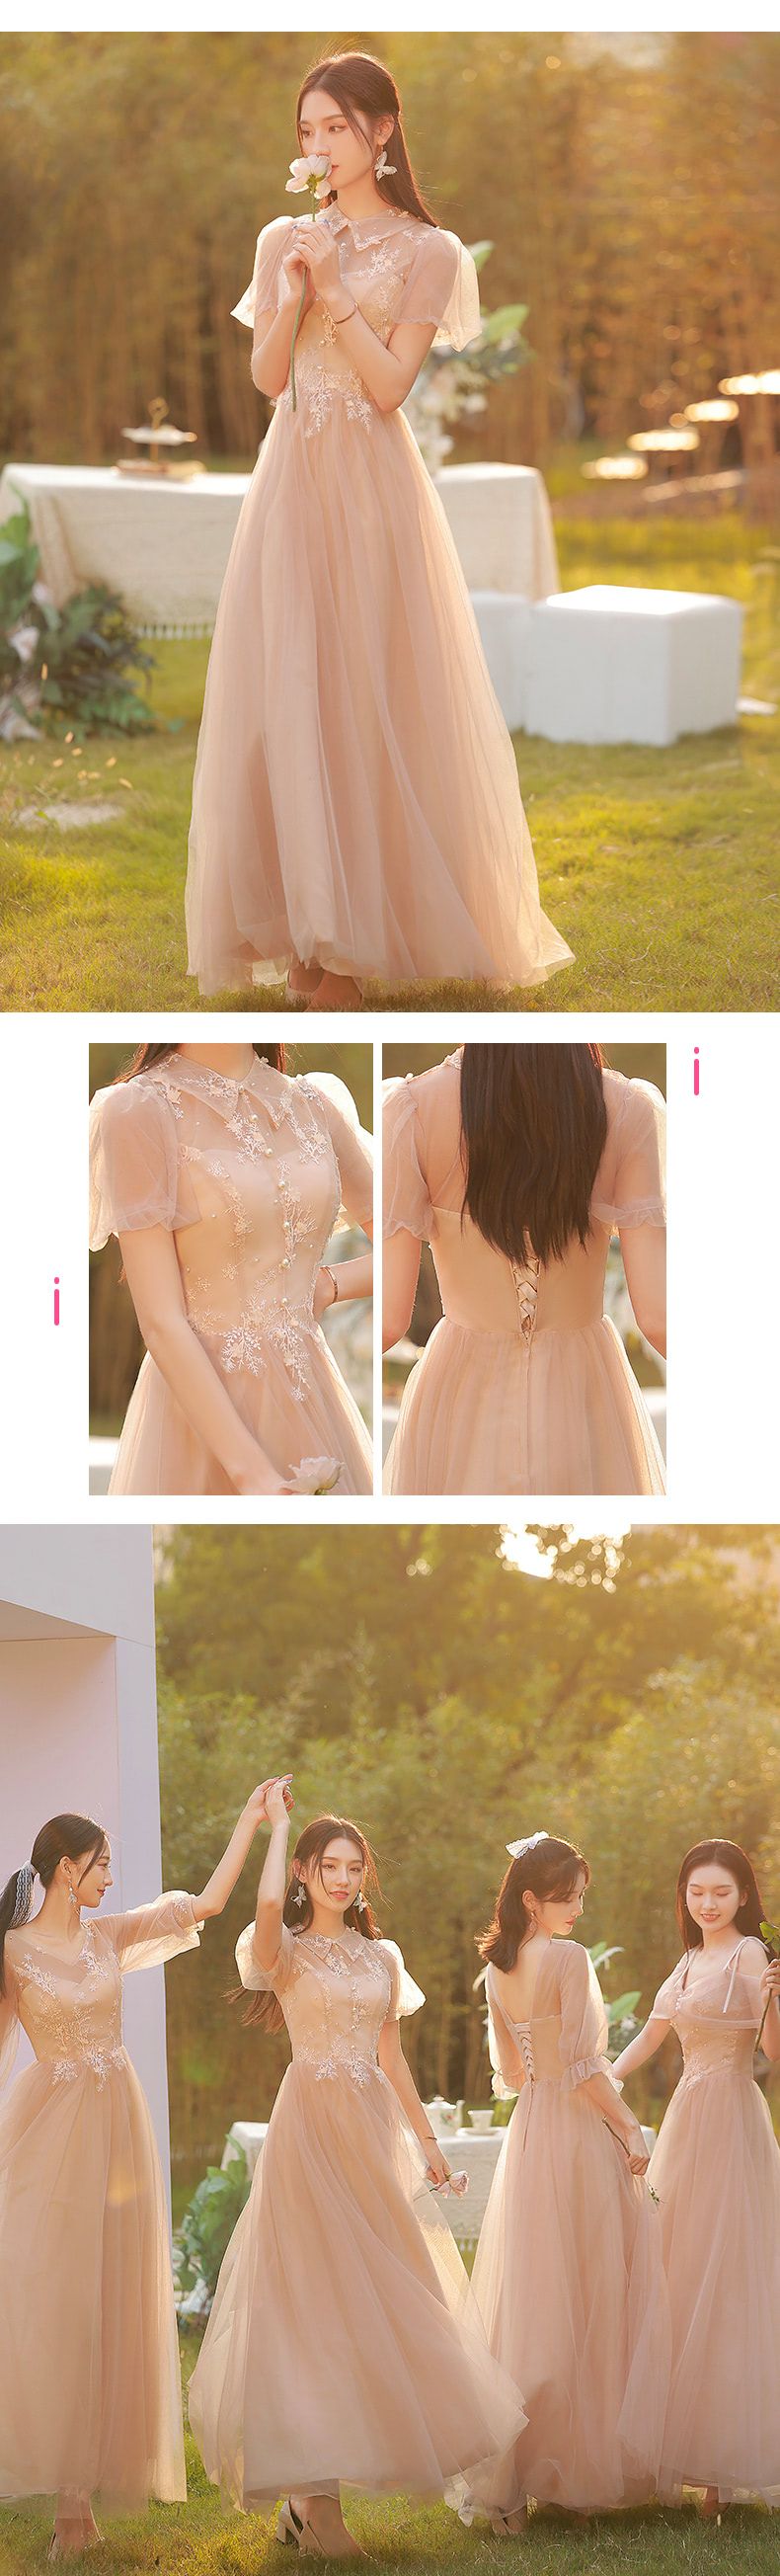 A-Line-Champagne-Wedding-Guest-Bridesmaid-Dress-Casual-Gown21.jpg